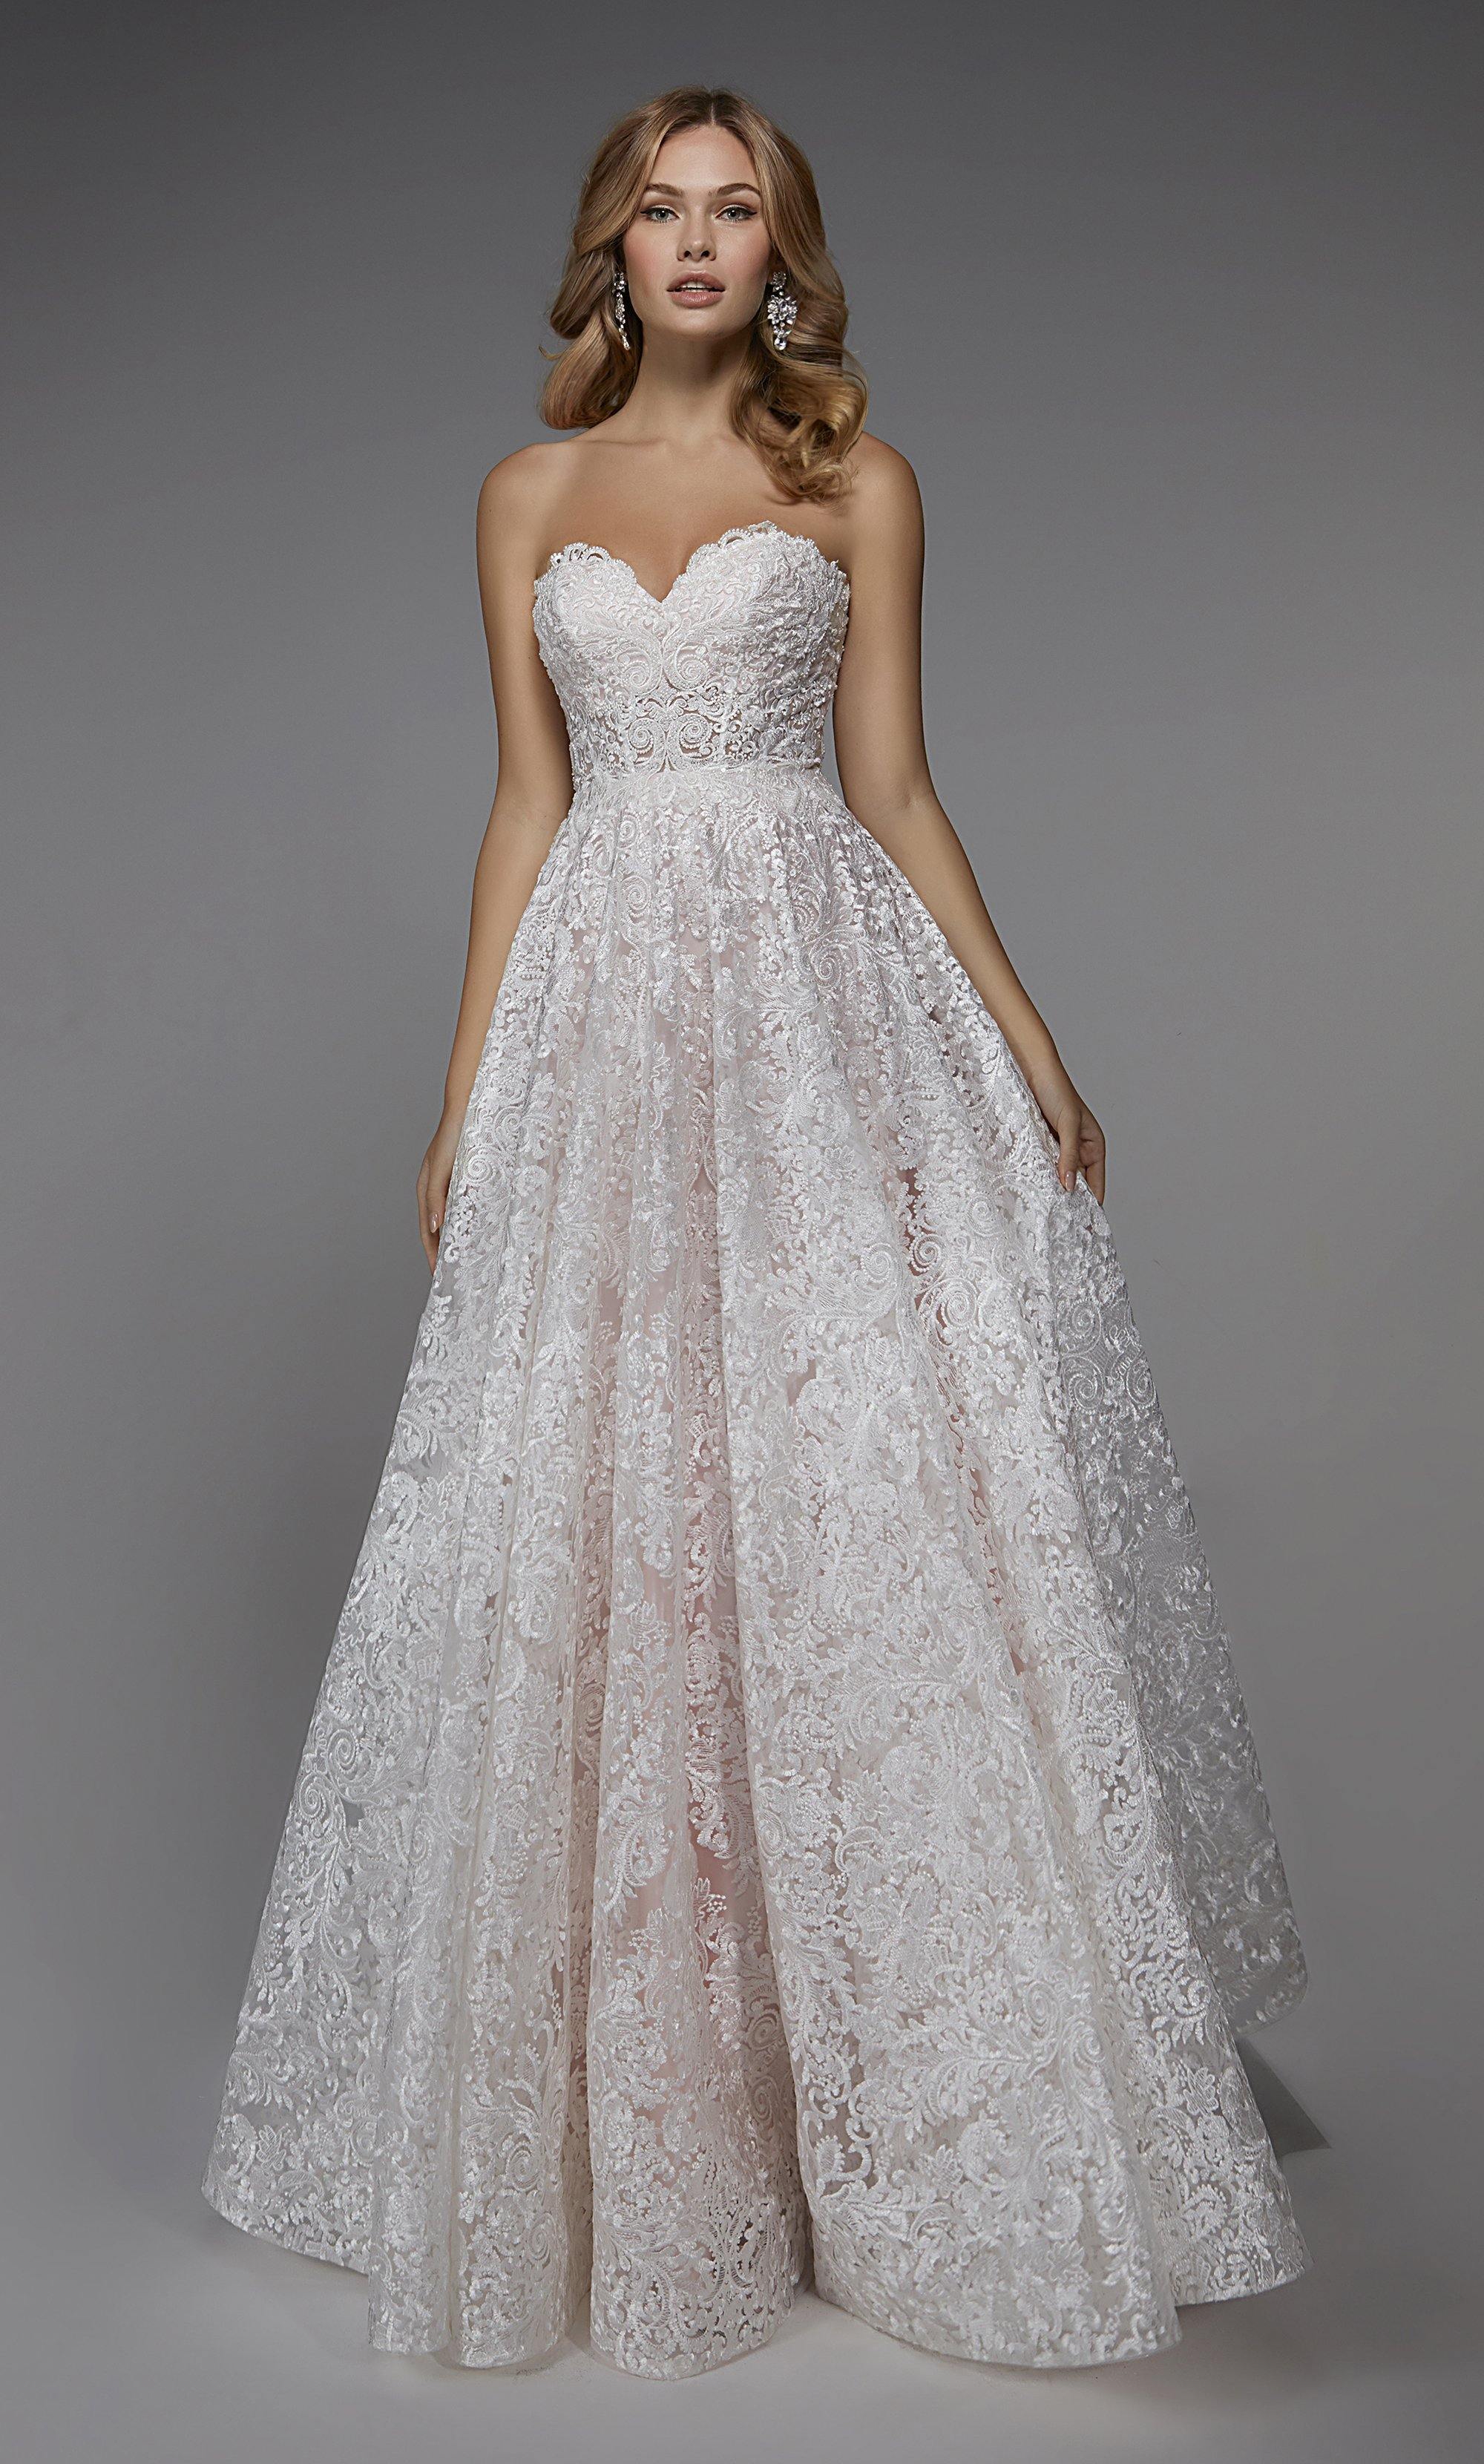 Formal Dress: 7033. Long Bridal Gown, Strapless, A-line, Closed Alyce Paris